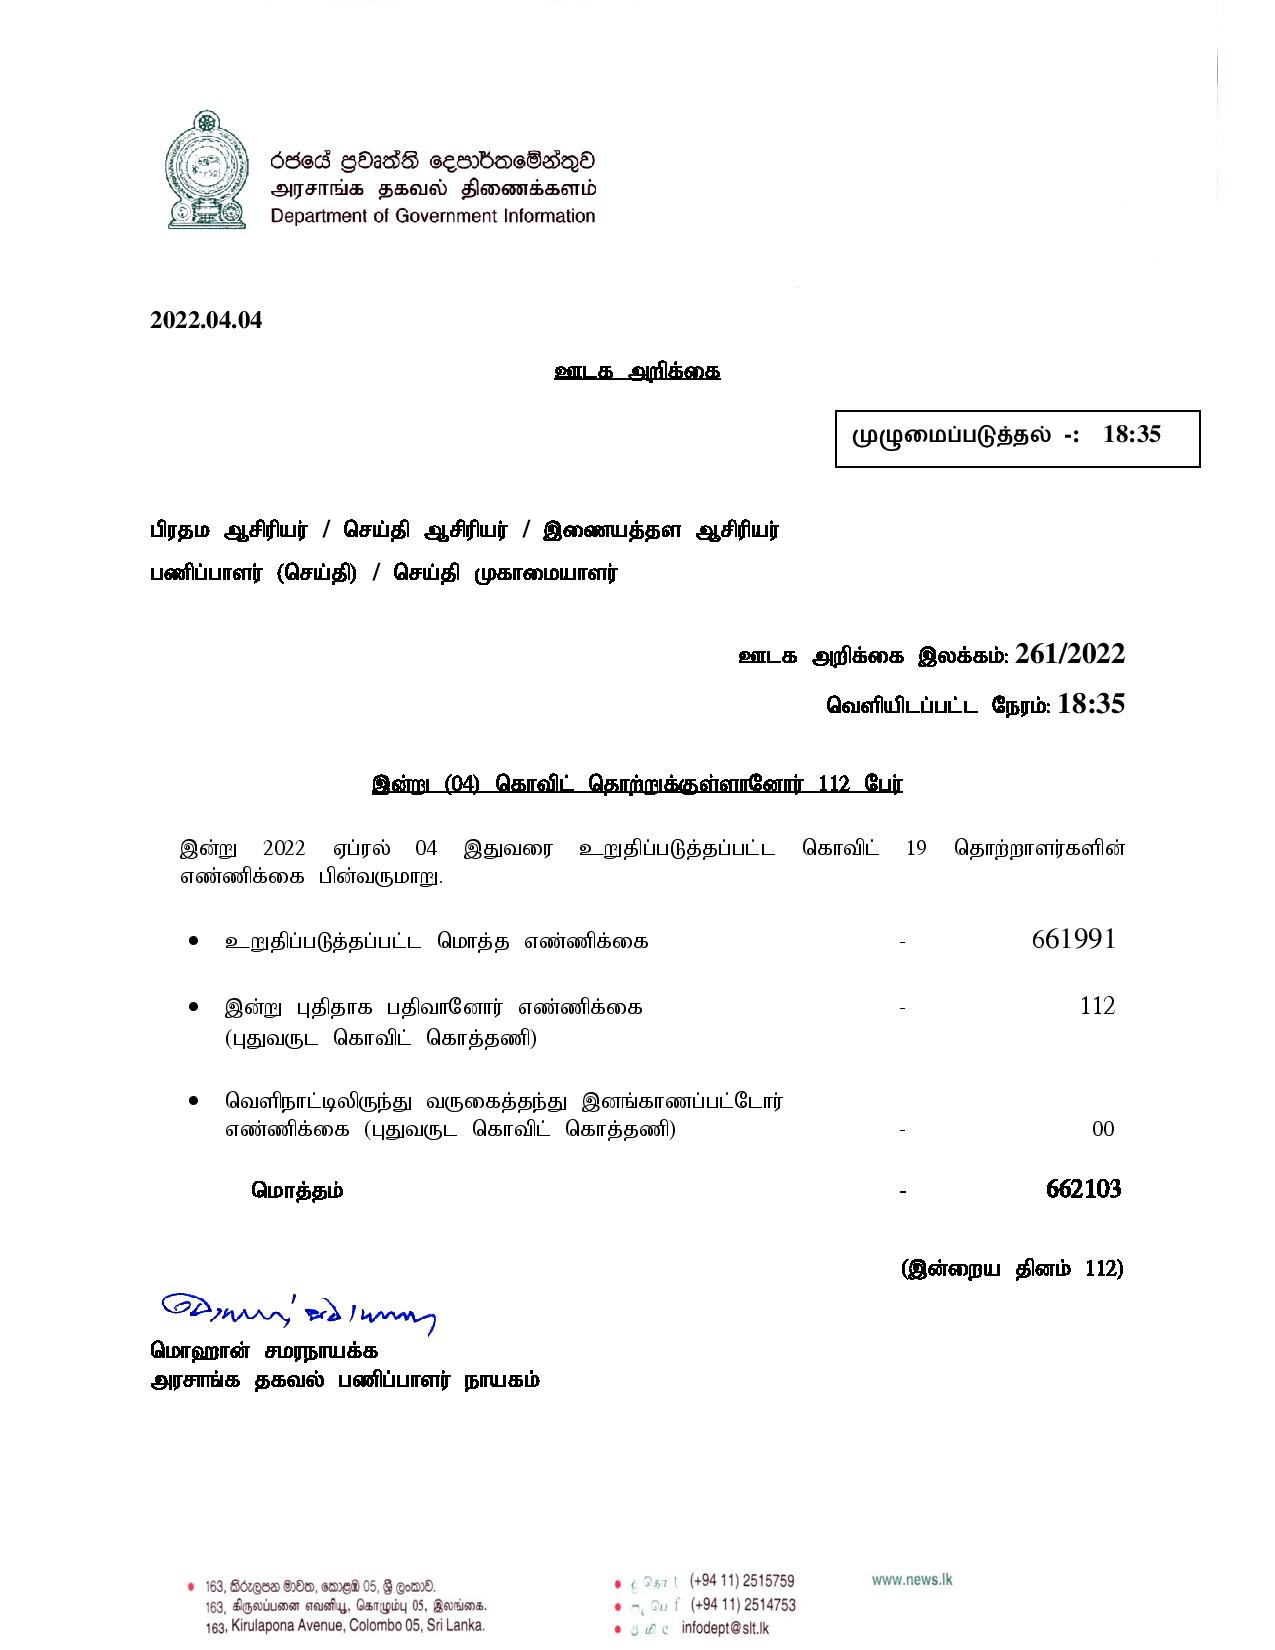 Press Release 261 Tamil page 001